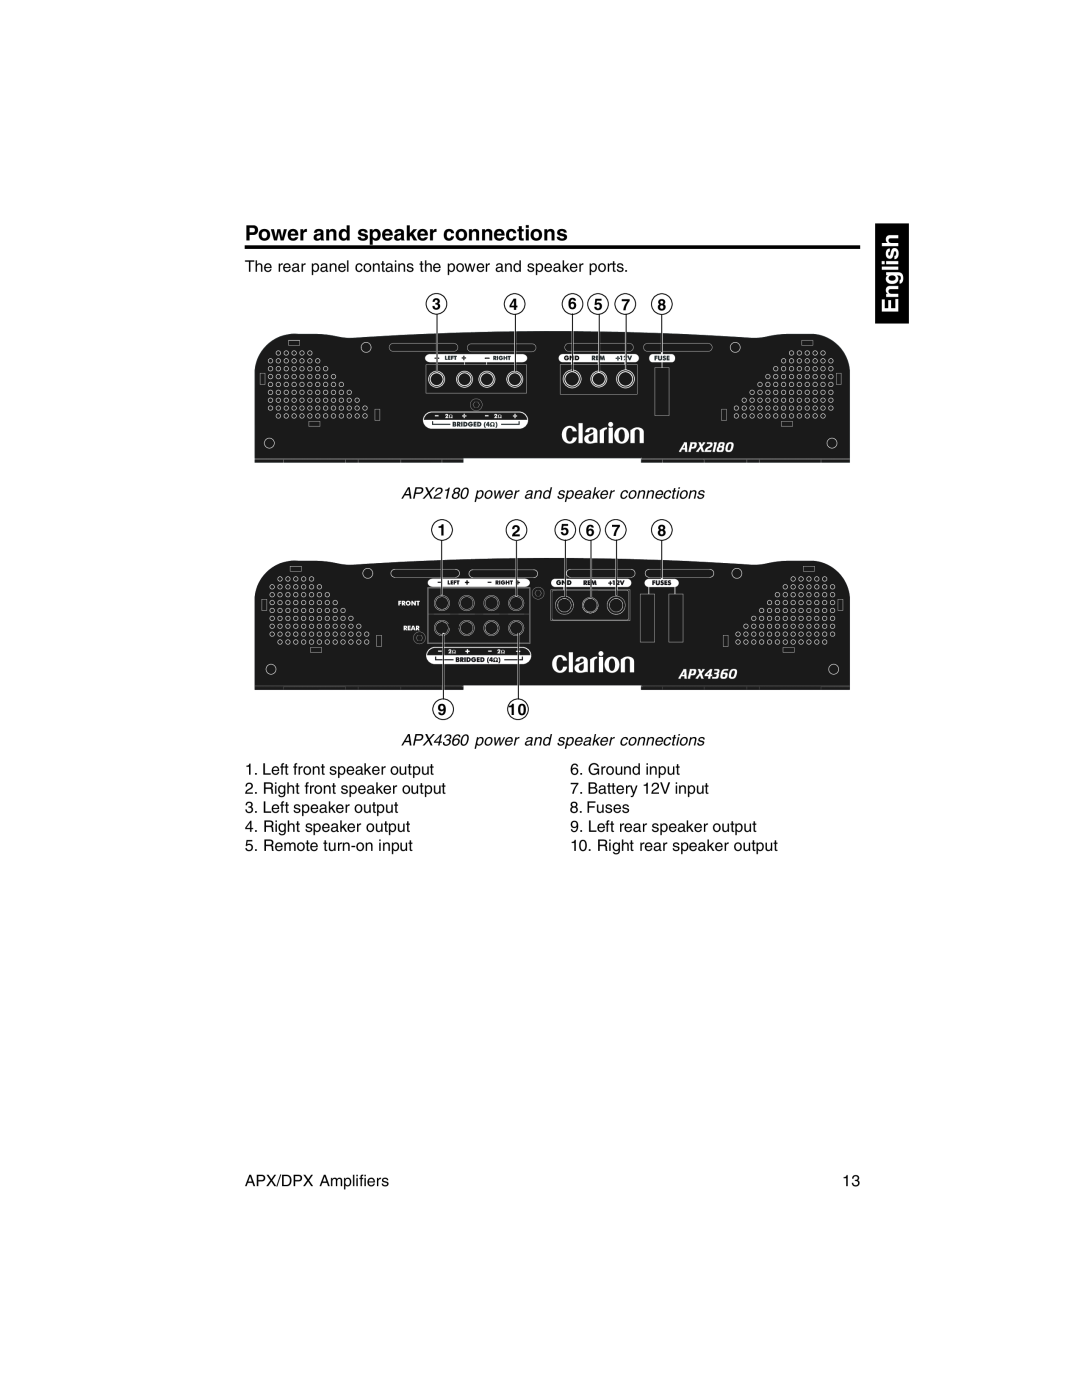 Clarion DPX2250, DPX1800, DPX11500, APX2180, APX4360 owner manual Power and speaker connections, English, APX/DPX Amplifiers 